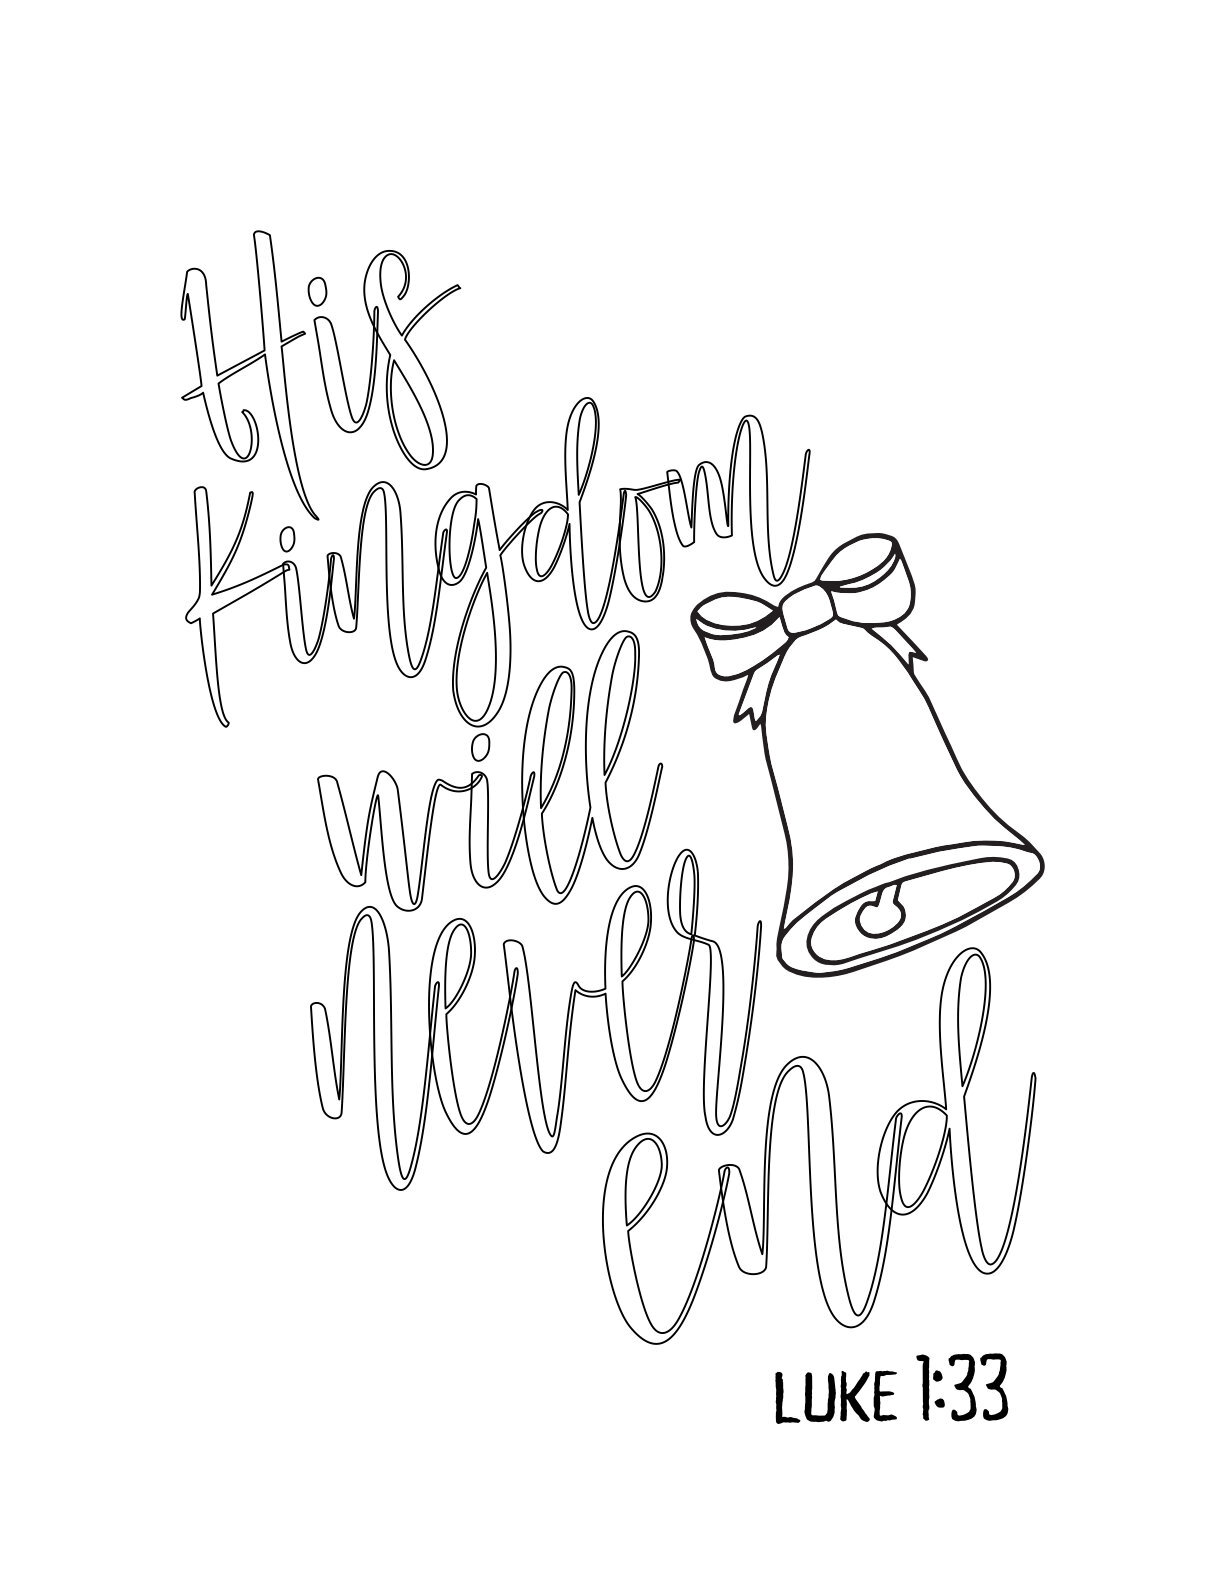 Free Simple Advent Coloring Page - Luke 1:33 CLICK HERE TO DOWNLOAD YOUR FREE COLORING PAGE